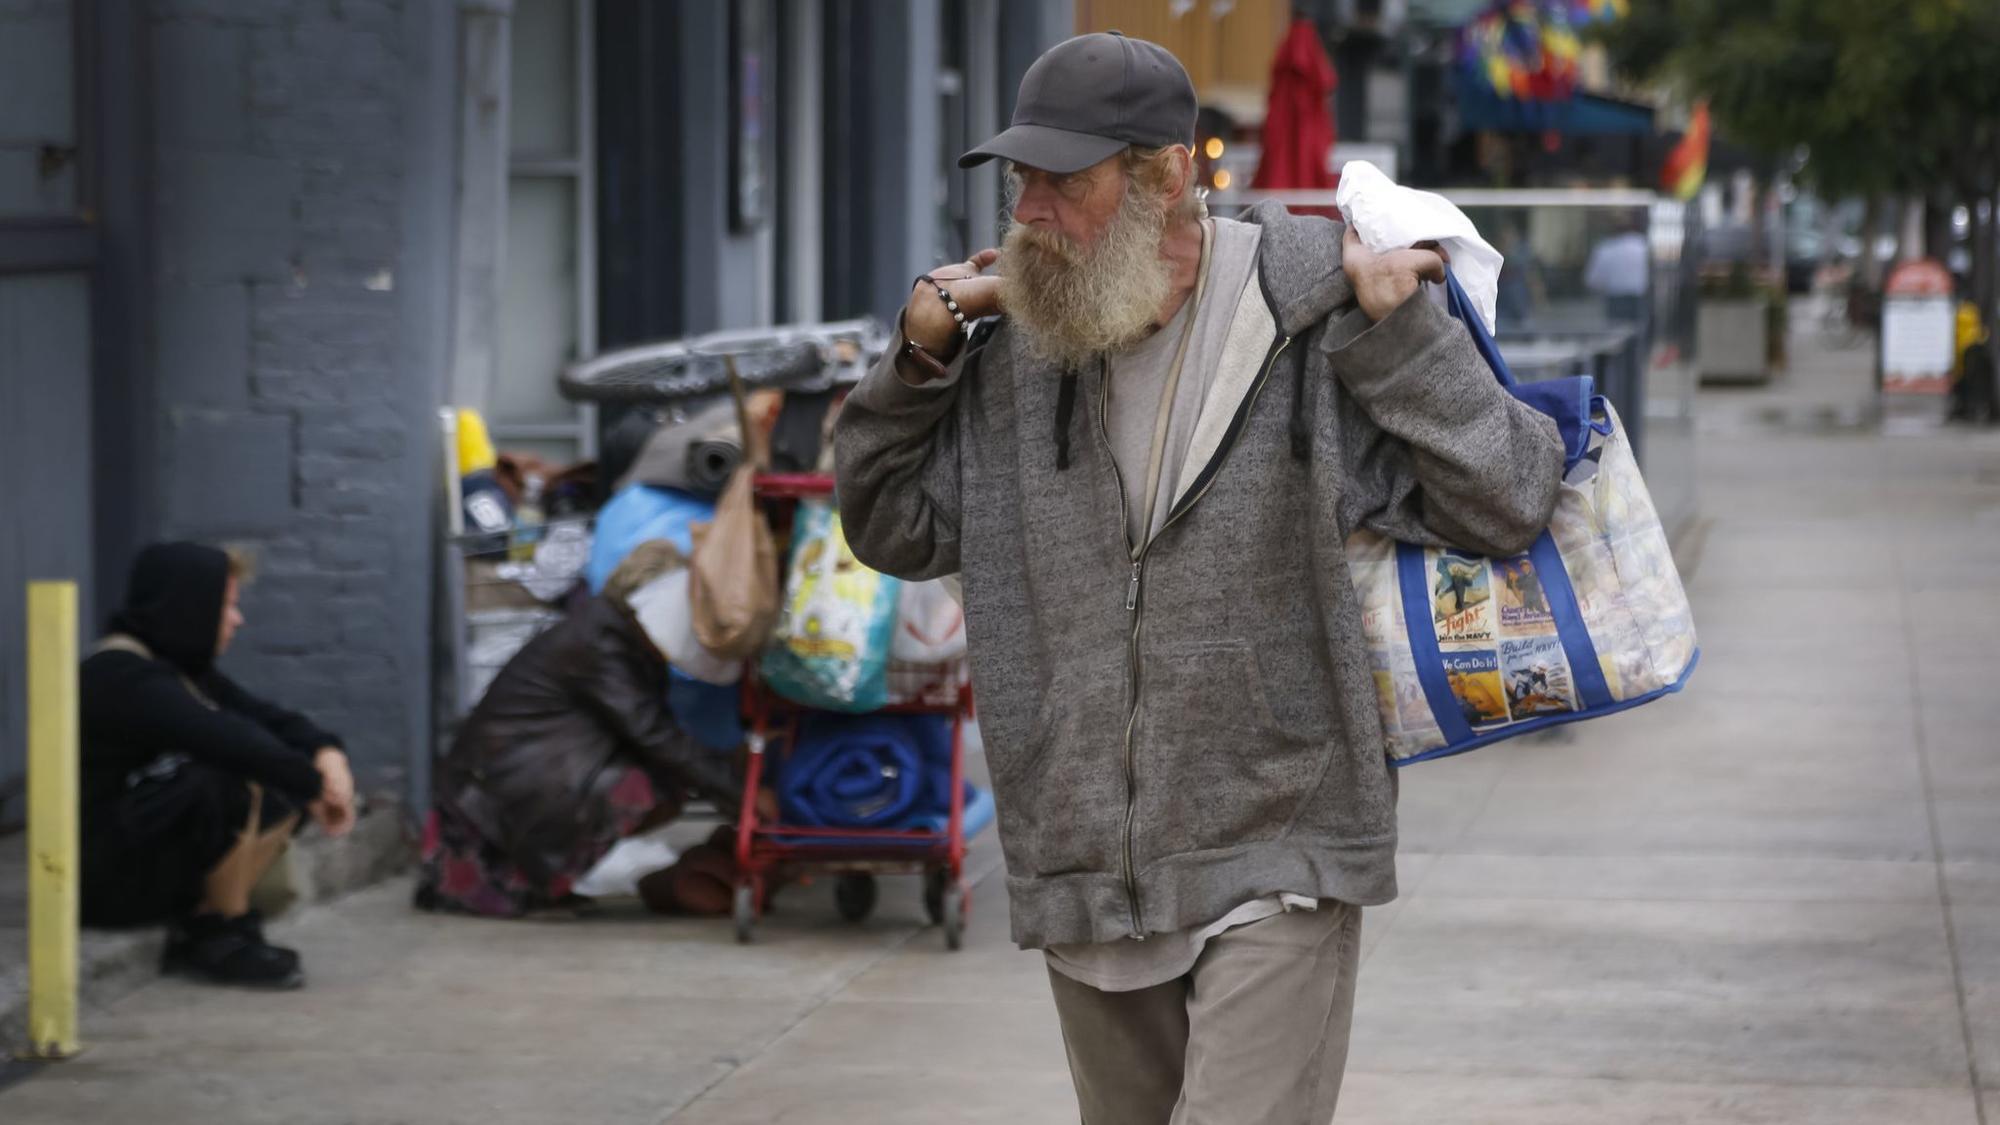 why so many homeless in san diego